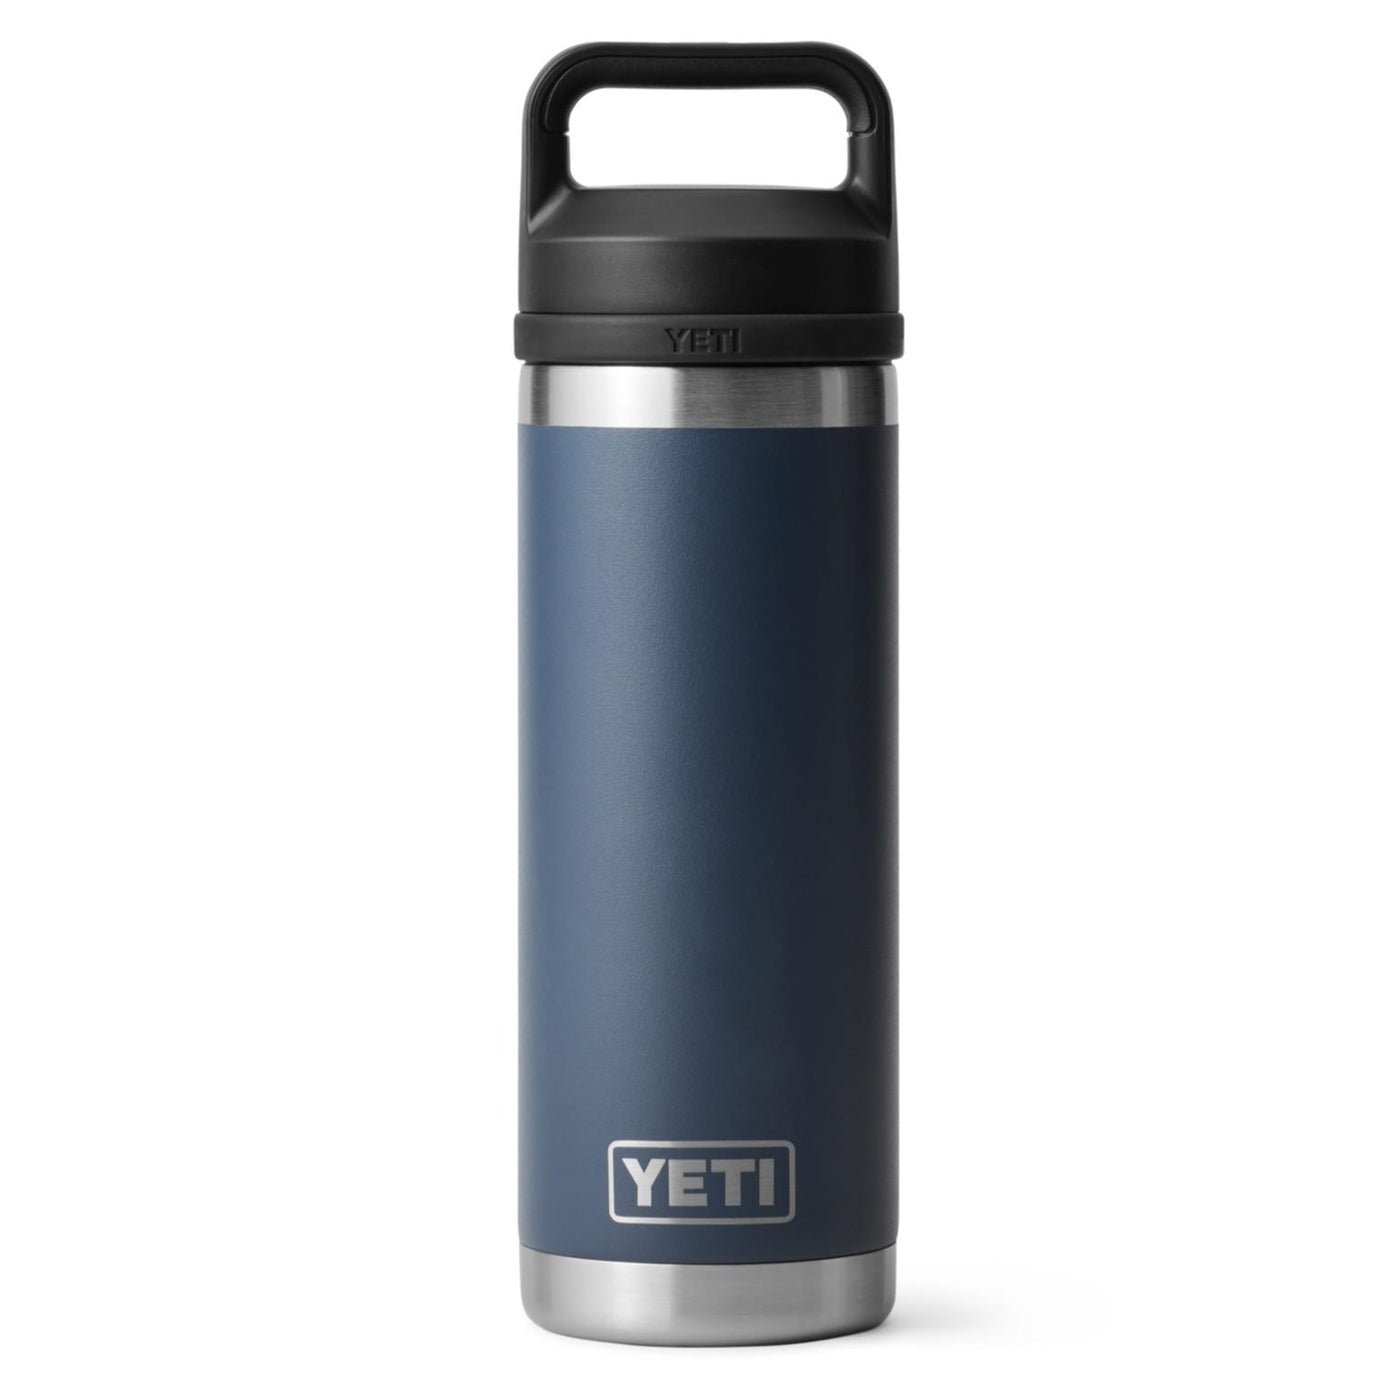 Yeti Rambler 18 oz Bottle with Chug Cap-Hunting/Outdoors-Navy-Kevin's Fine Outdoor Gear & Apparel